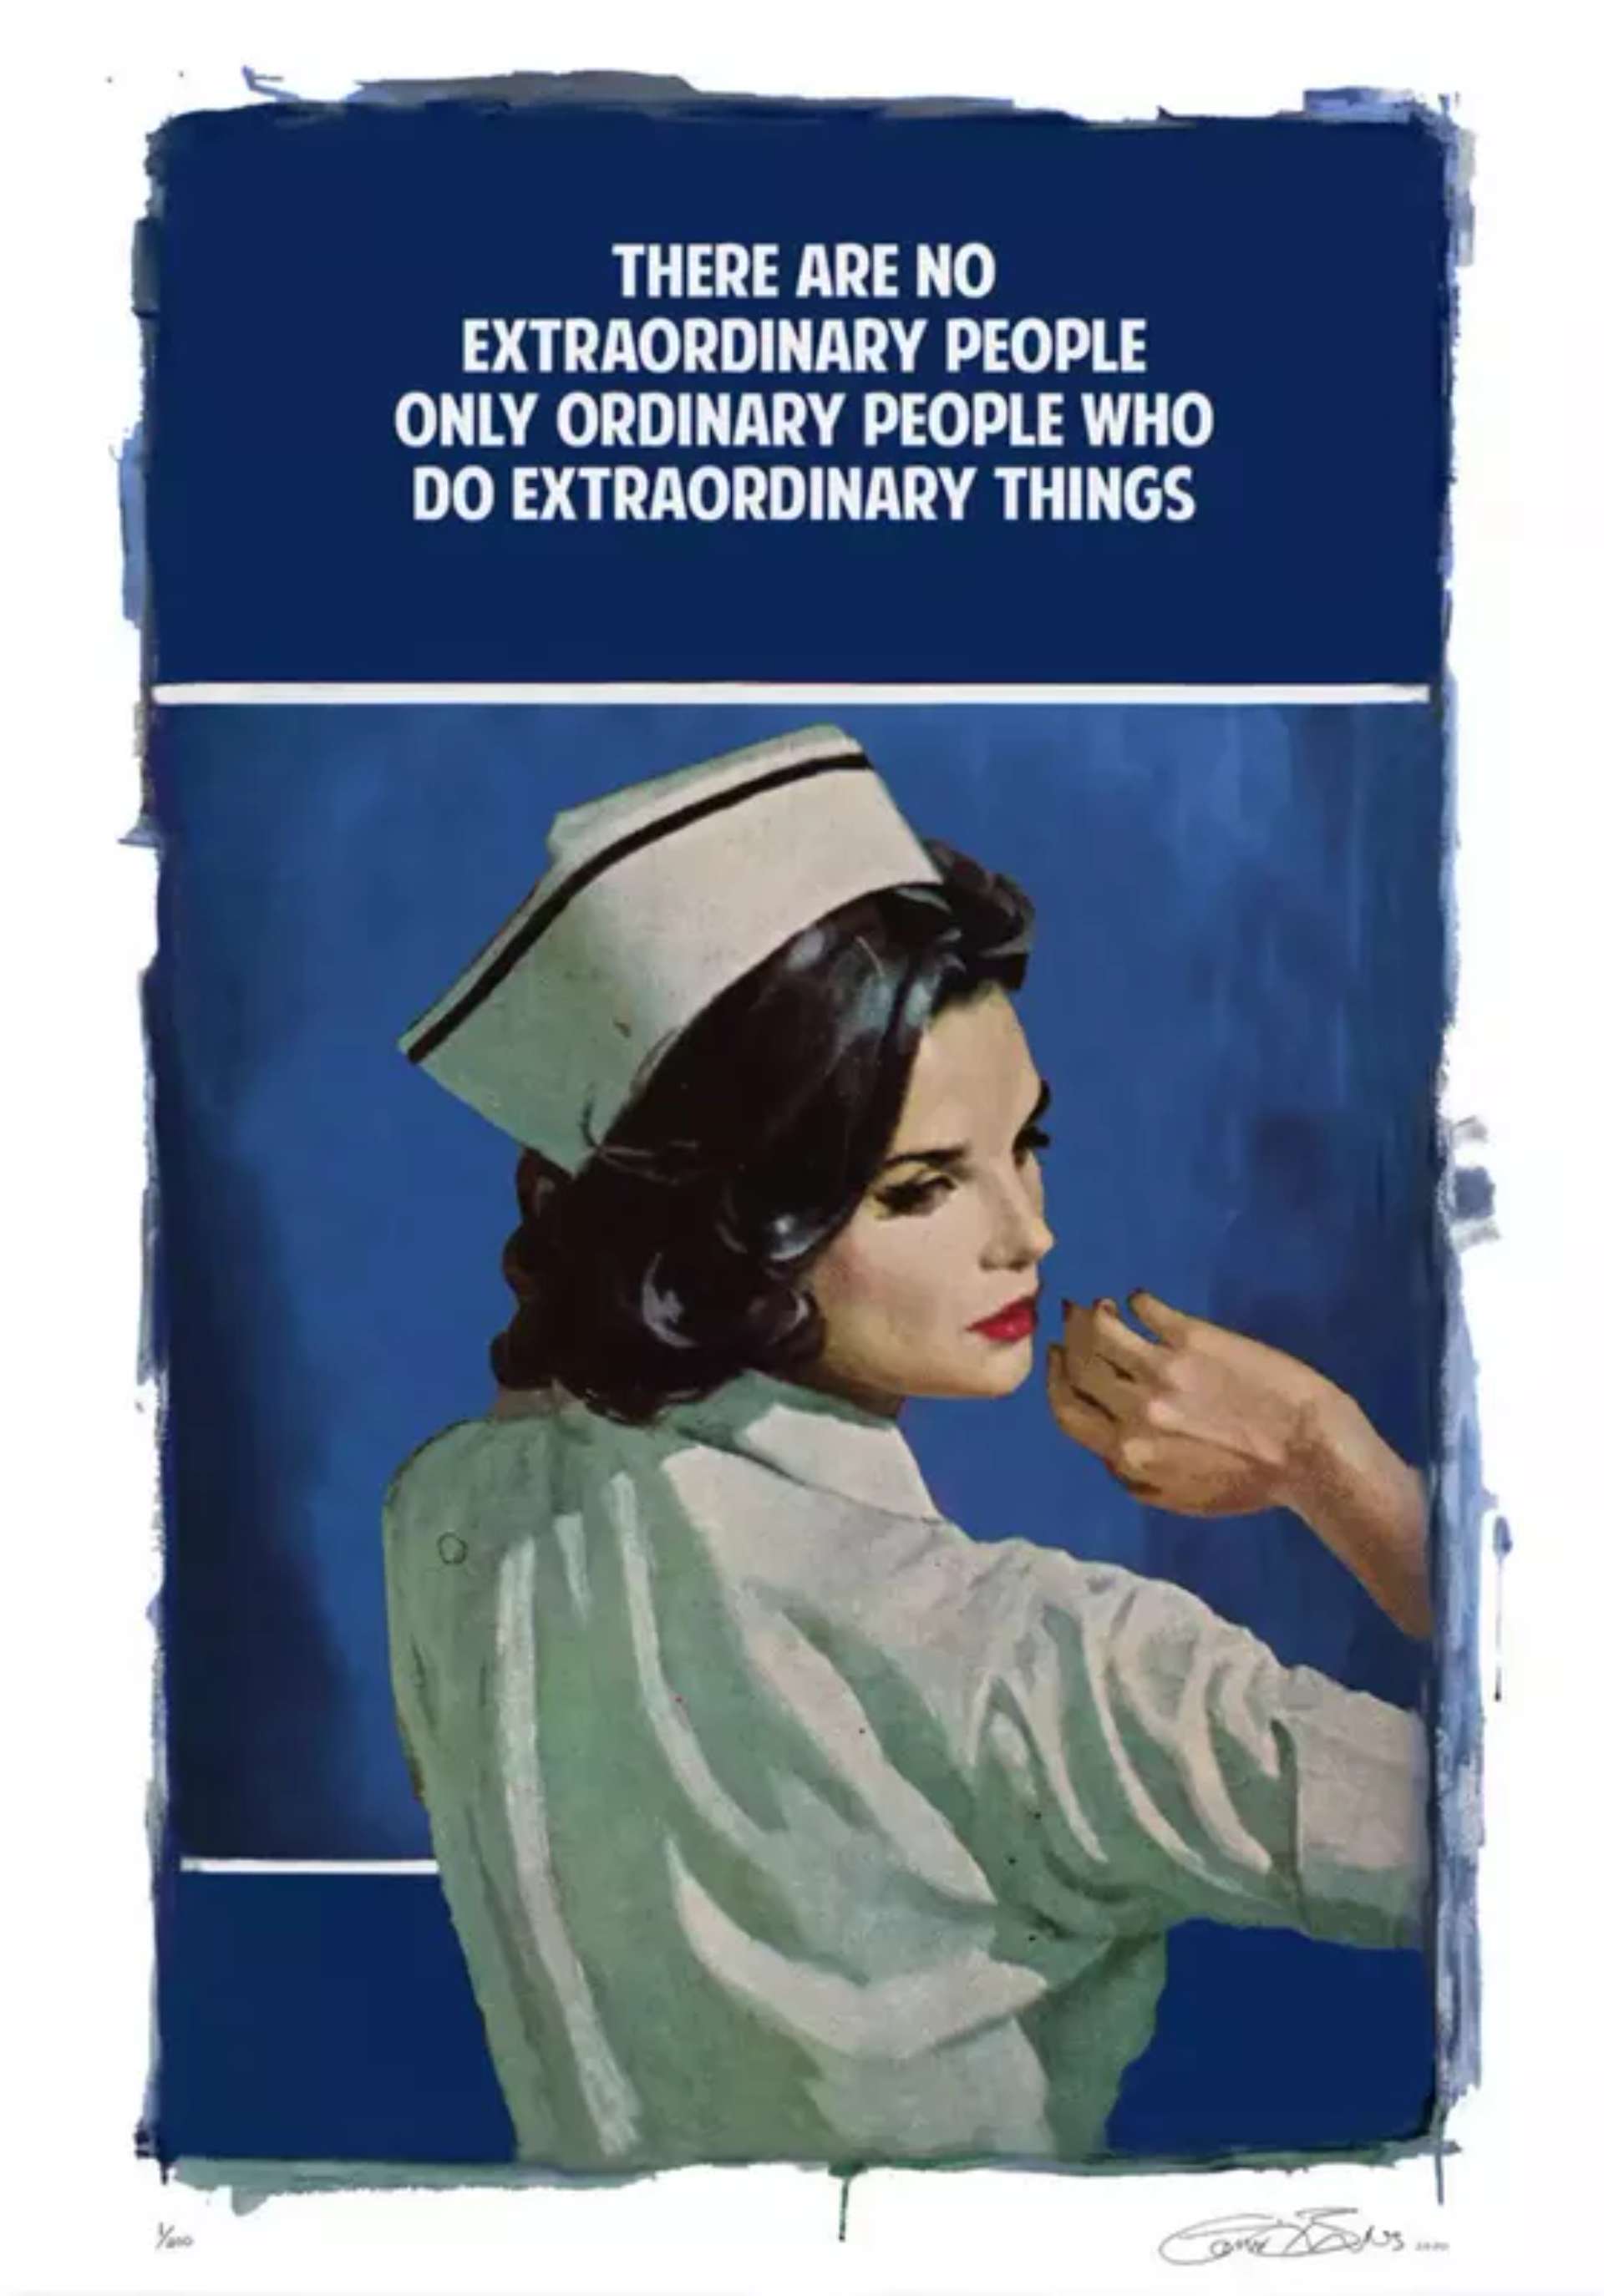 A dark-haired woman in a sailors hat and white shirt with the text: THERE ARE NO EXTRAORDINARY PEOPLE, ONLY ORDINARY PEOPLE WHO DO EXTRAORDINARY THINGS in block capitals.